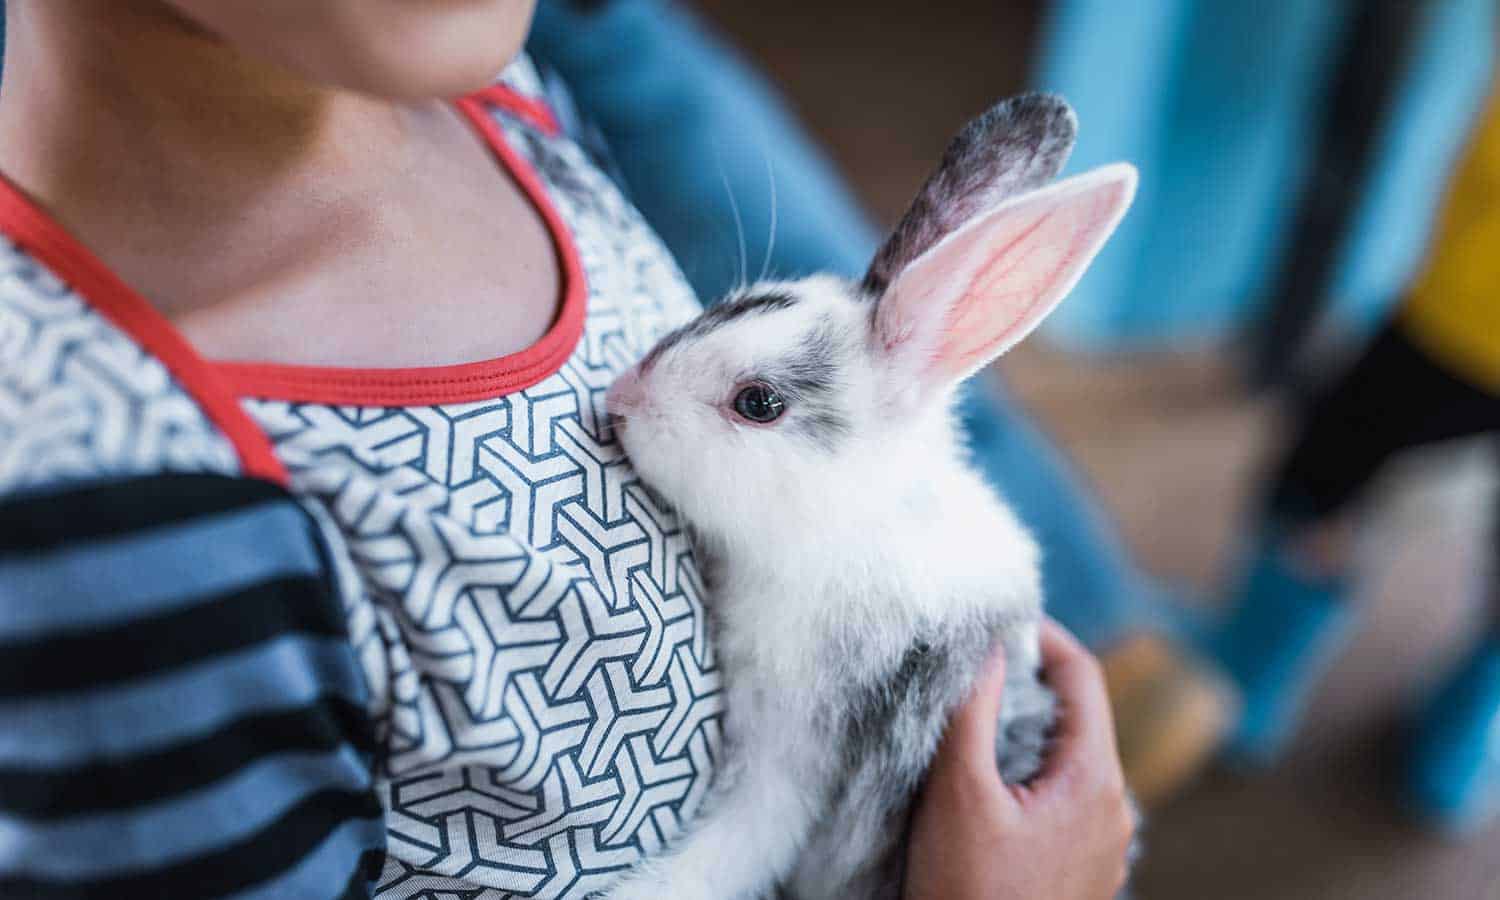 A rabbit being held